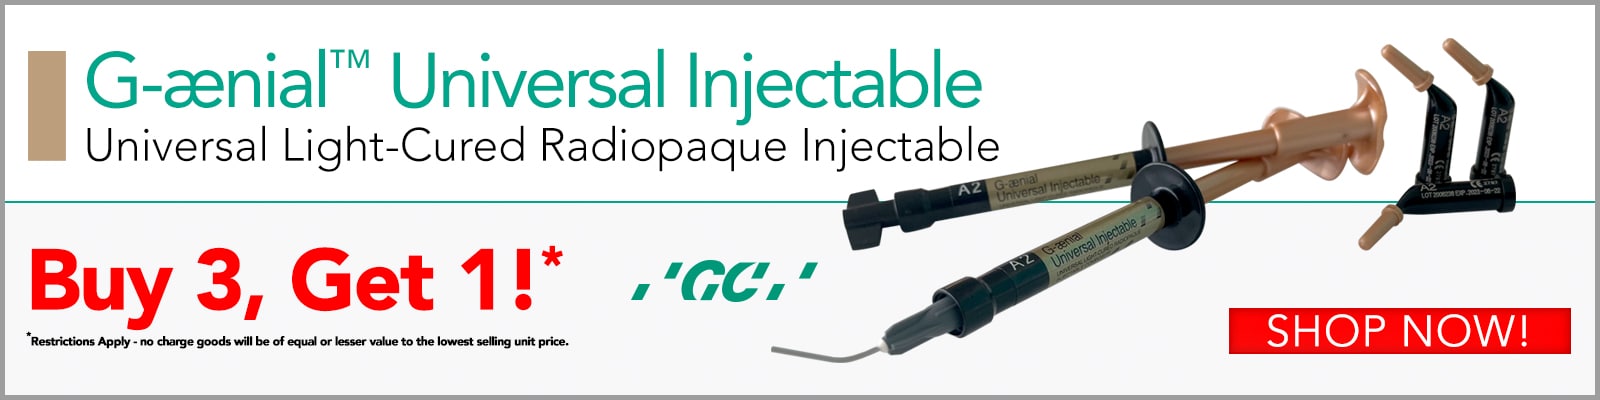 Universal Injectable